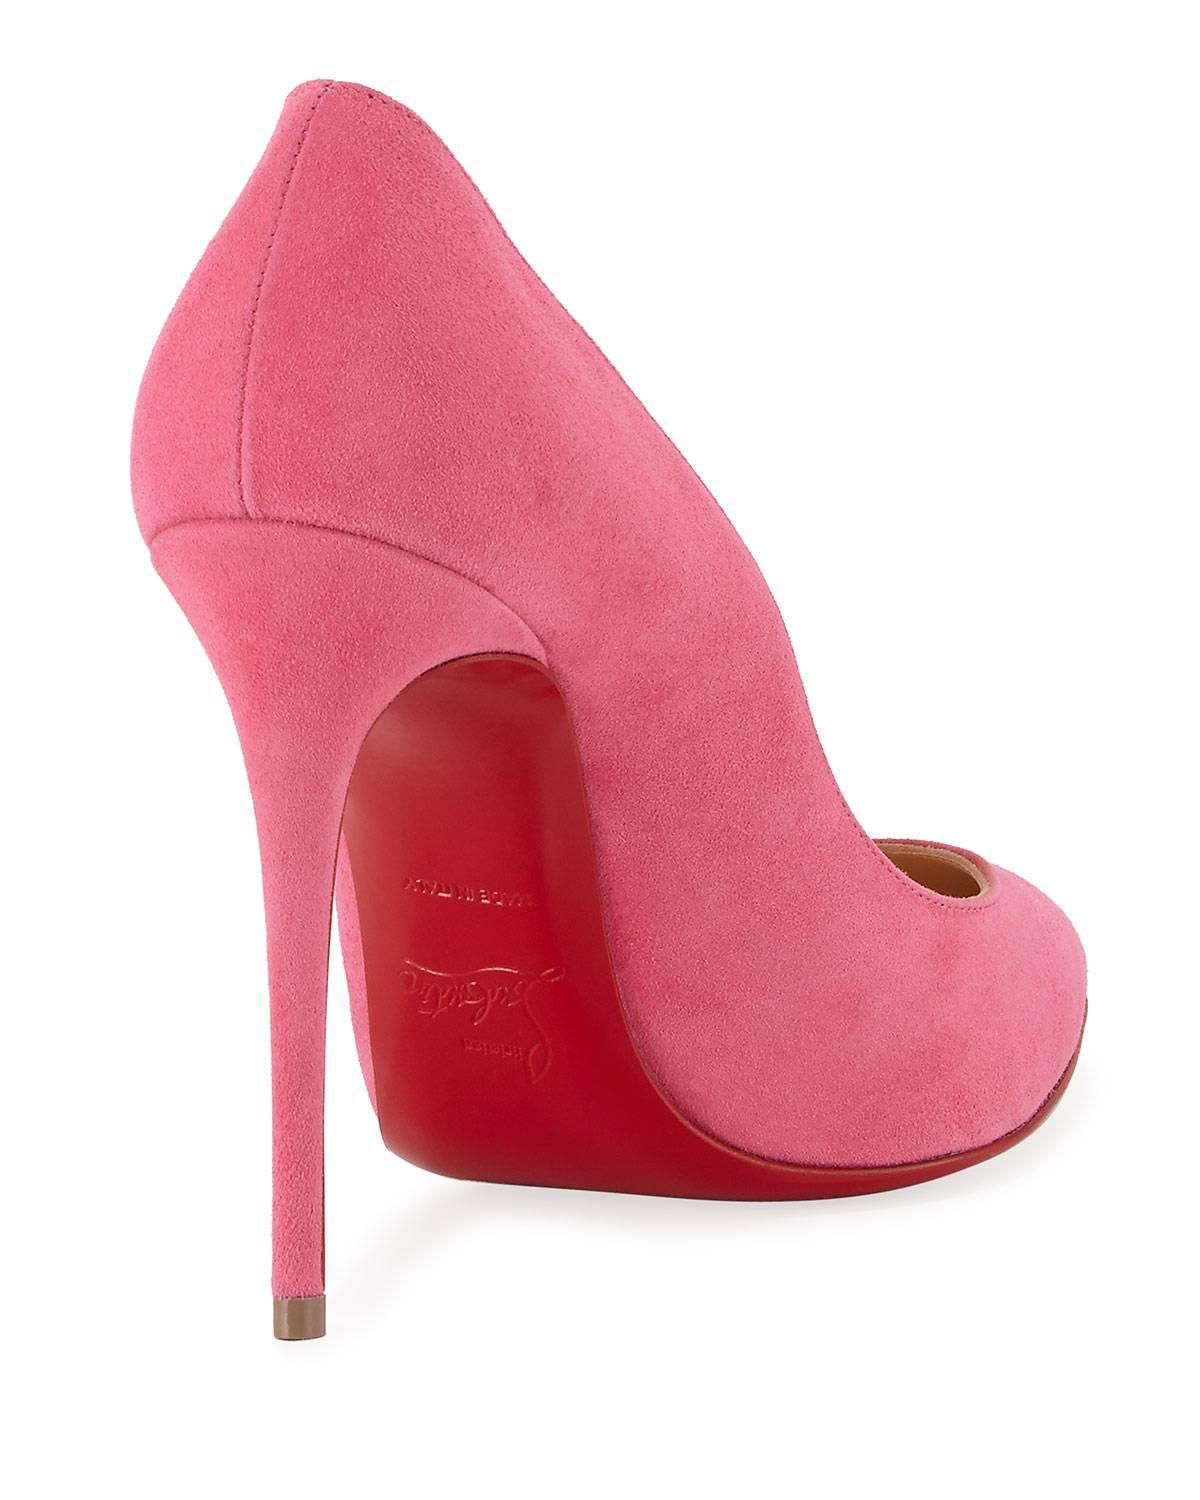 Women's Christian Louboutin New Pink Suede Pigalle Follie High Heels Pumps in Box